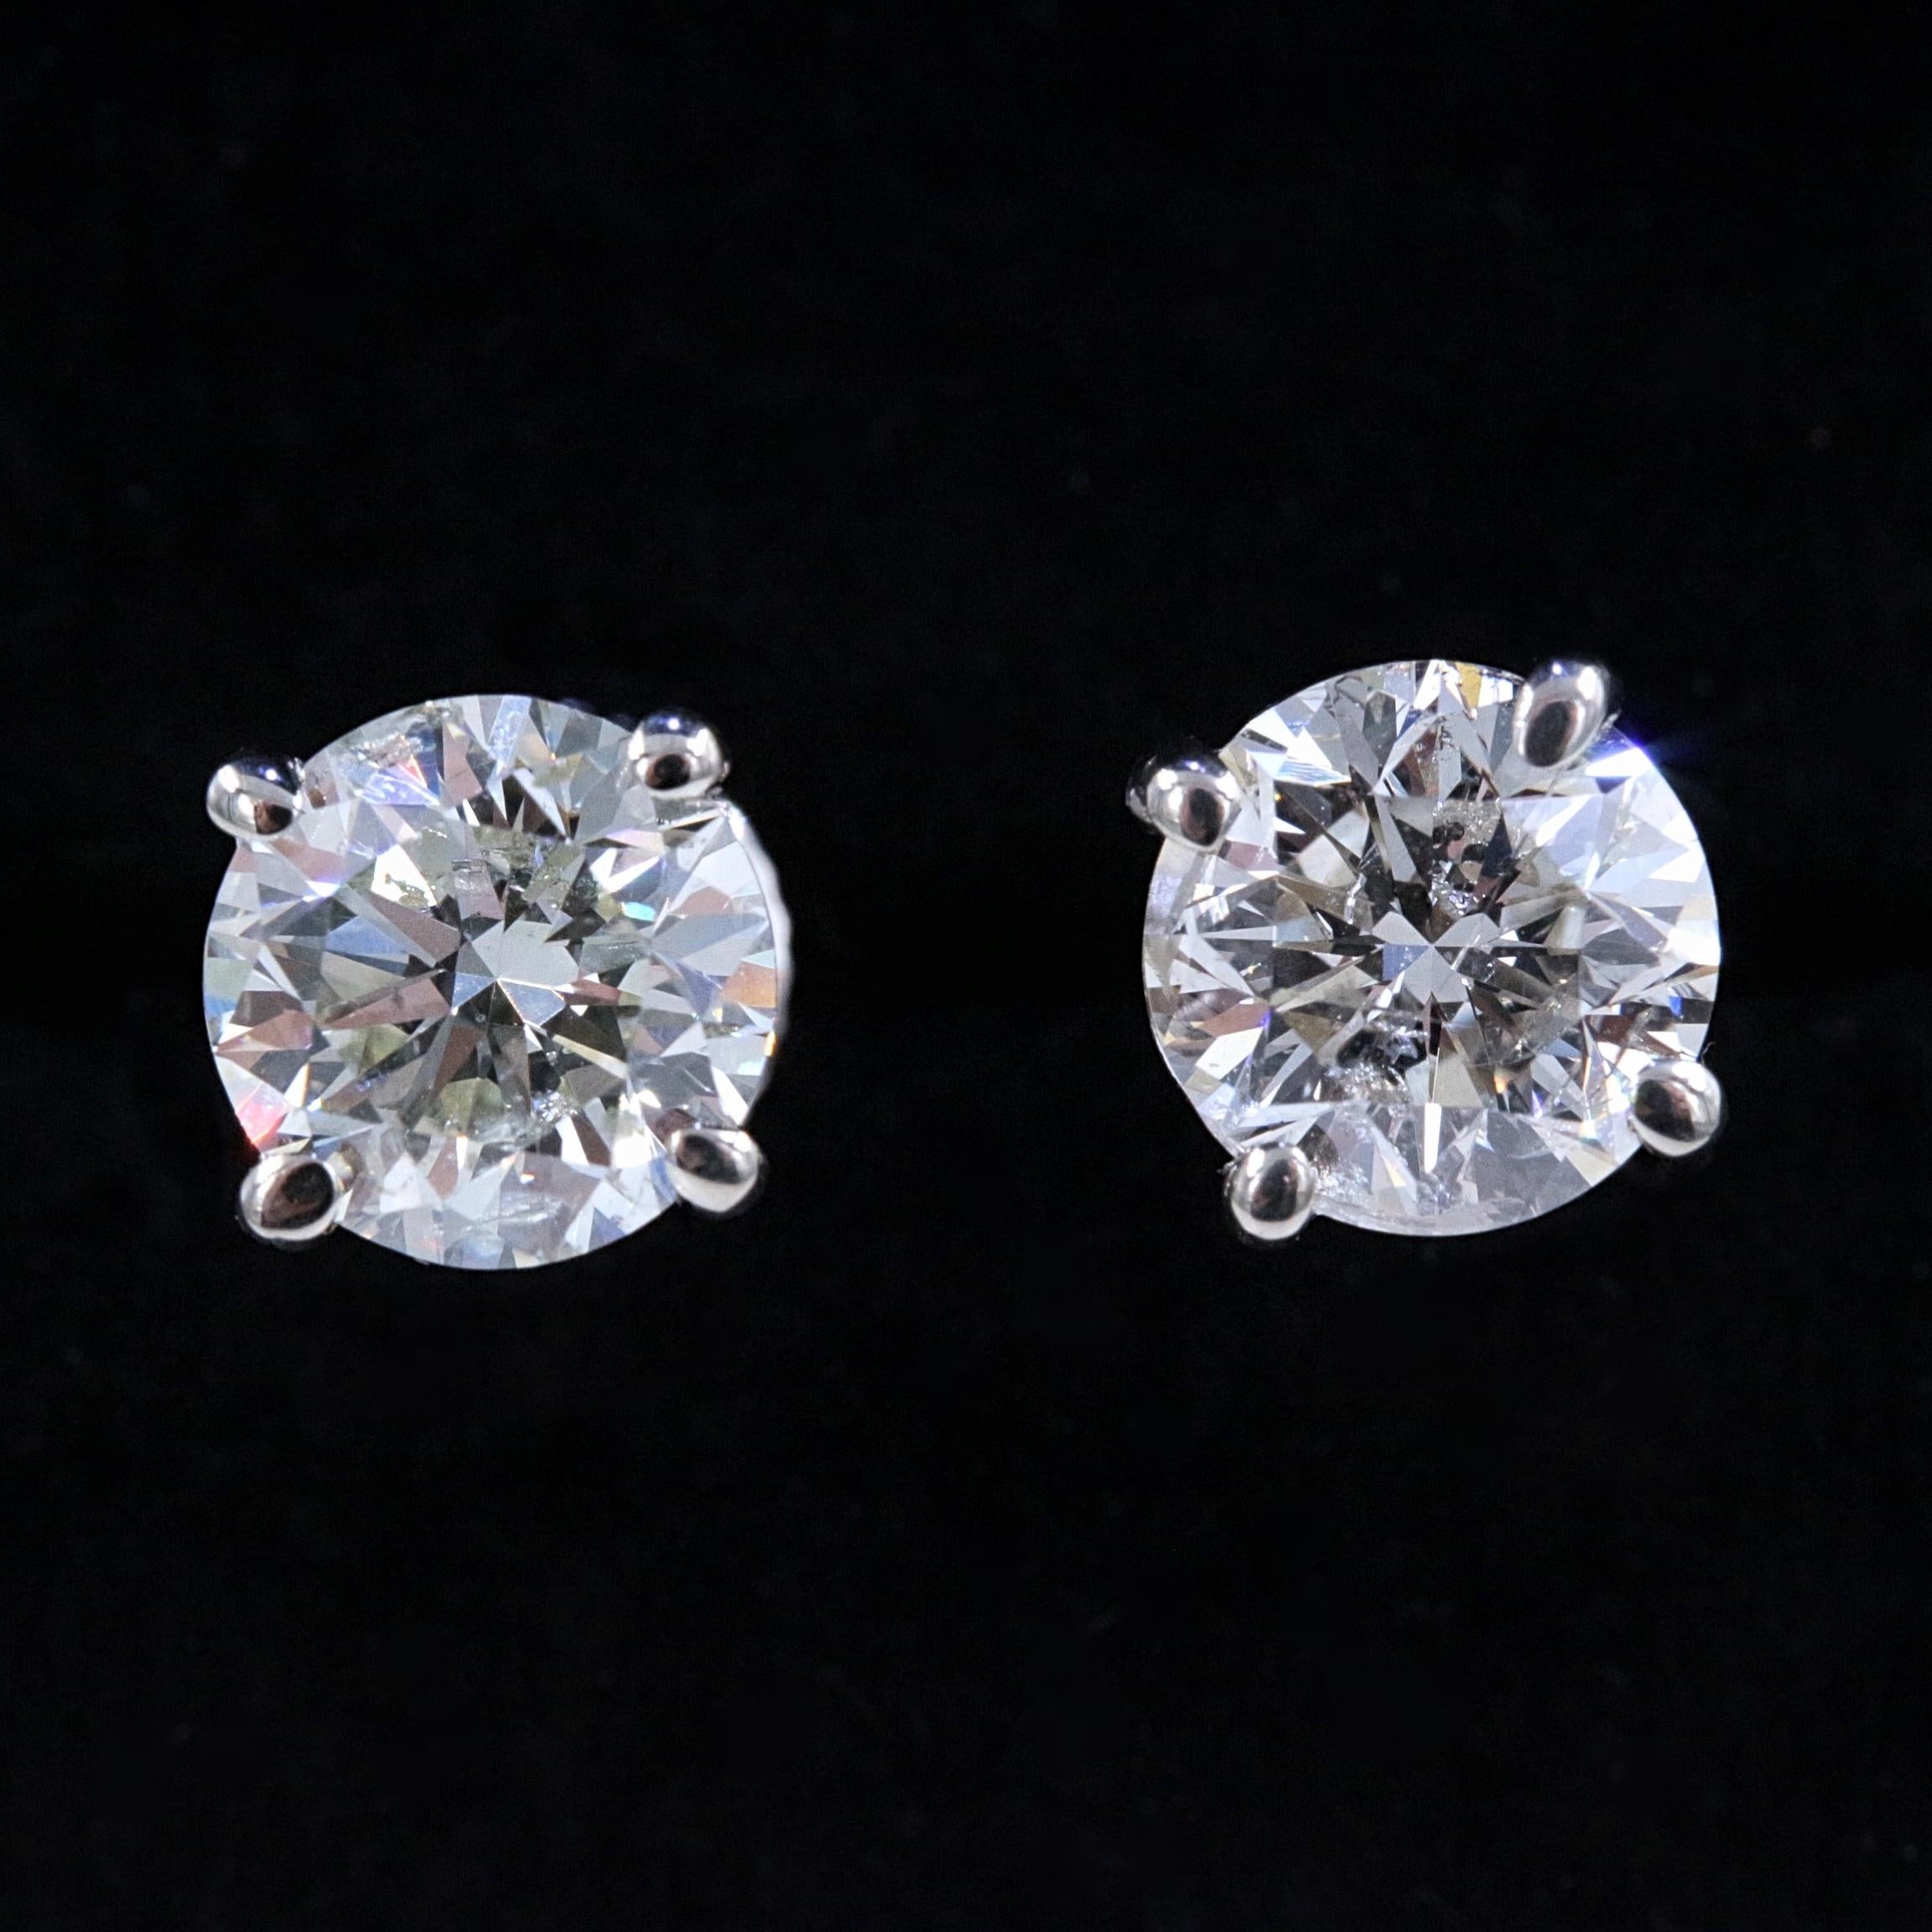 Round Diamond Solitaire Stud Earrings

Style:  Solitaire in 4-Prong Martini Setting with Screw Backs
Metal:  14k White Gold 
Total Carat Weight:  2.05 tcw
Diamond #1:  Round 1.00 cts I color, I1 clarity  
Diamond #2:  Round 1.05 cts I color, I1